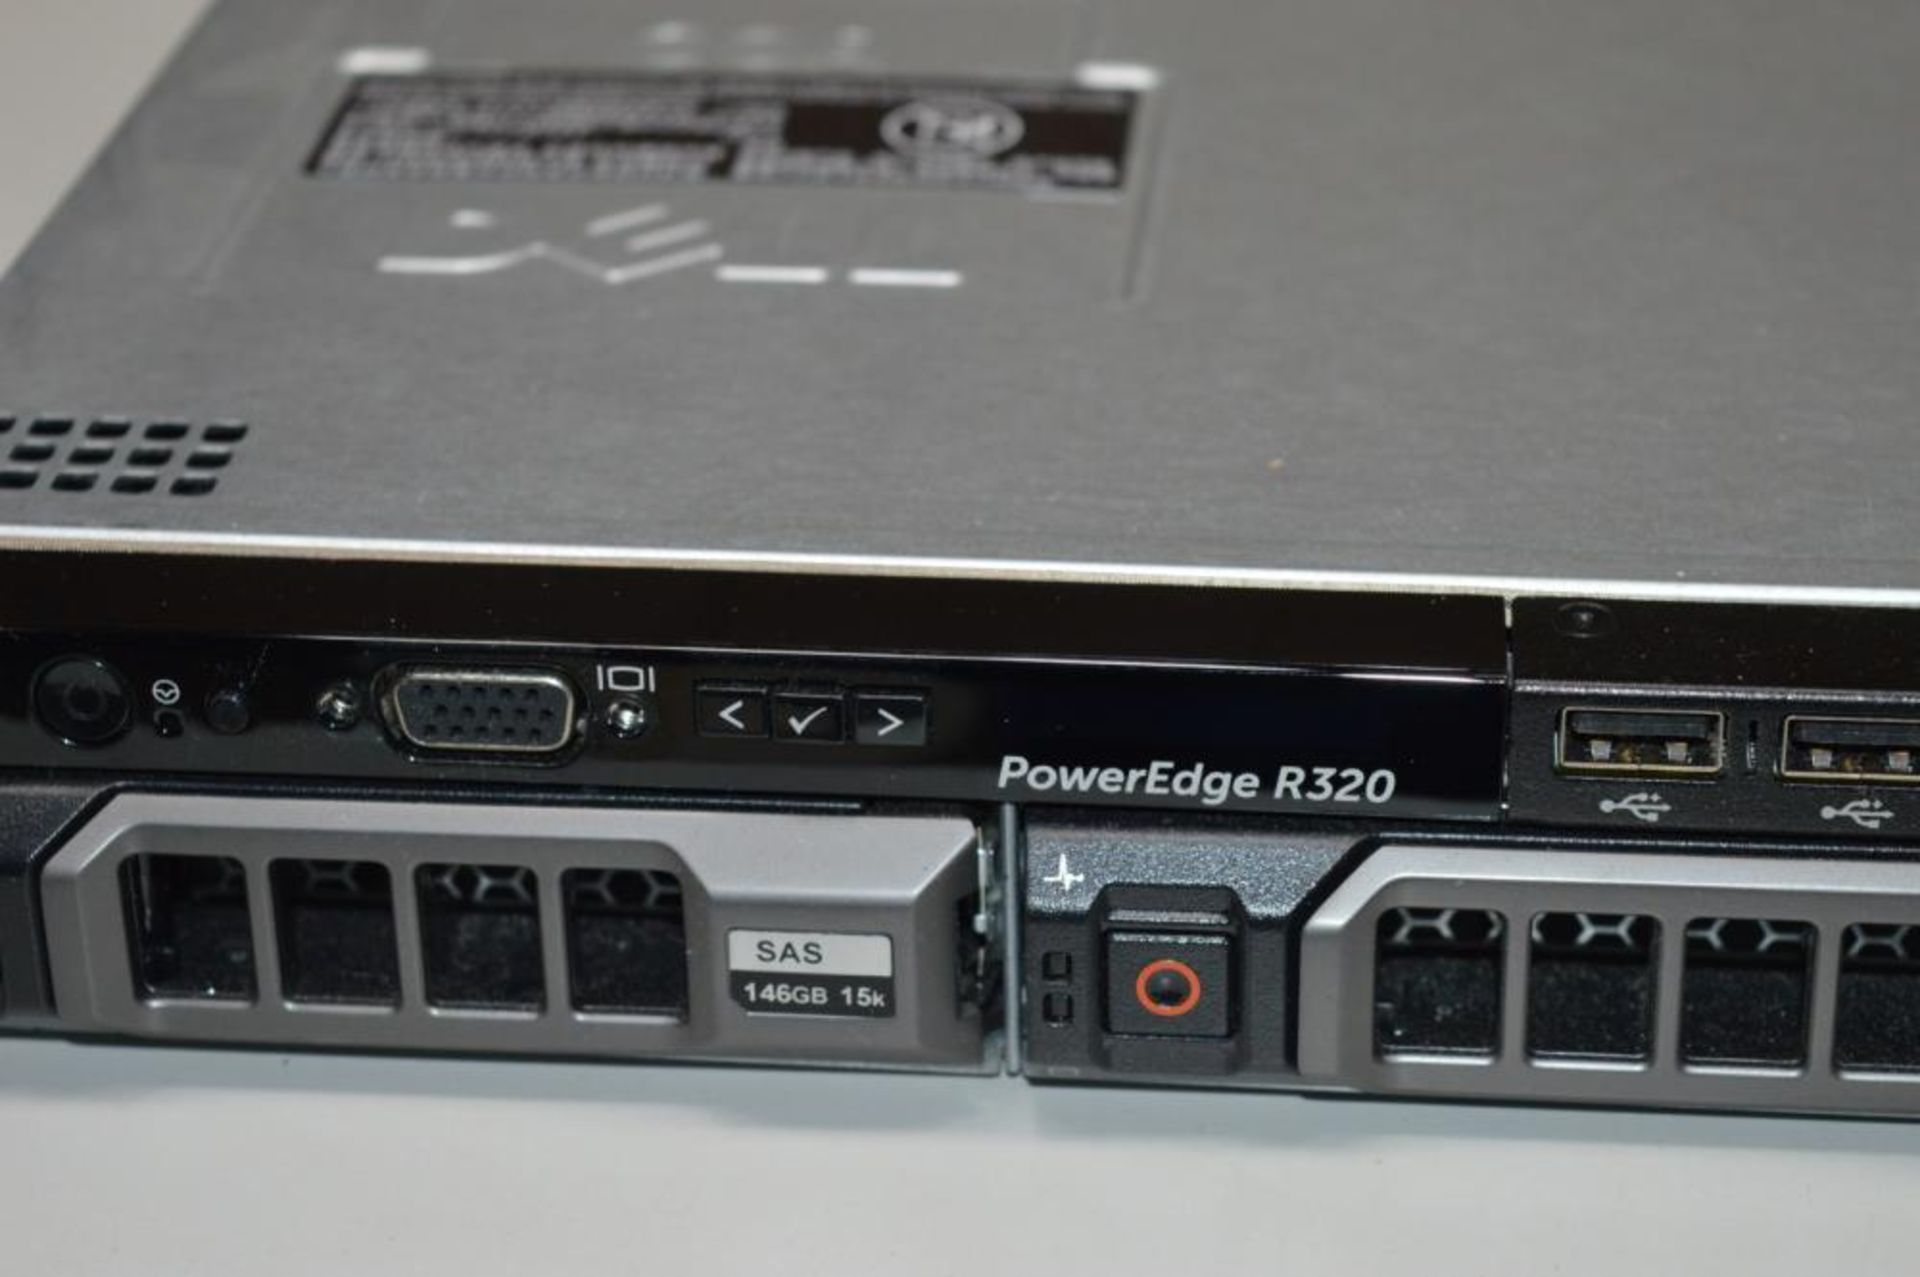 1 x Dell PowerEdge R320 Rack Mount Server - Features Intel Xeon E5-2407 Quad Core Processor and 4gb - Image 3 of 5